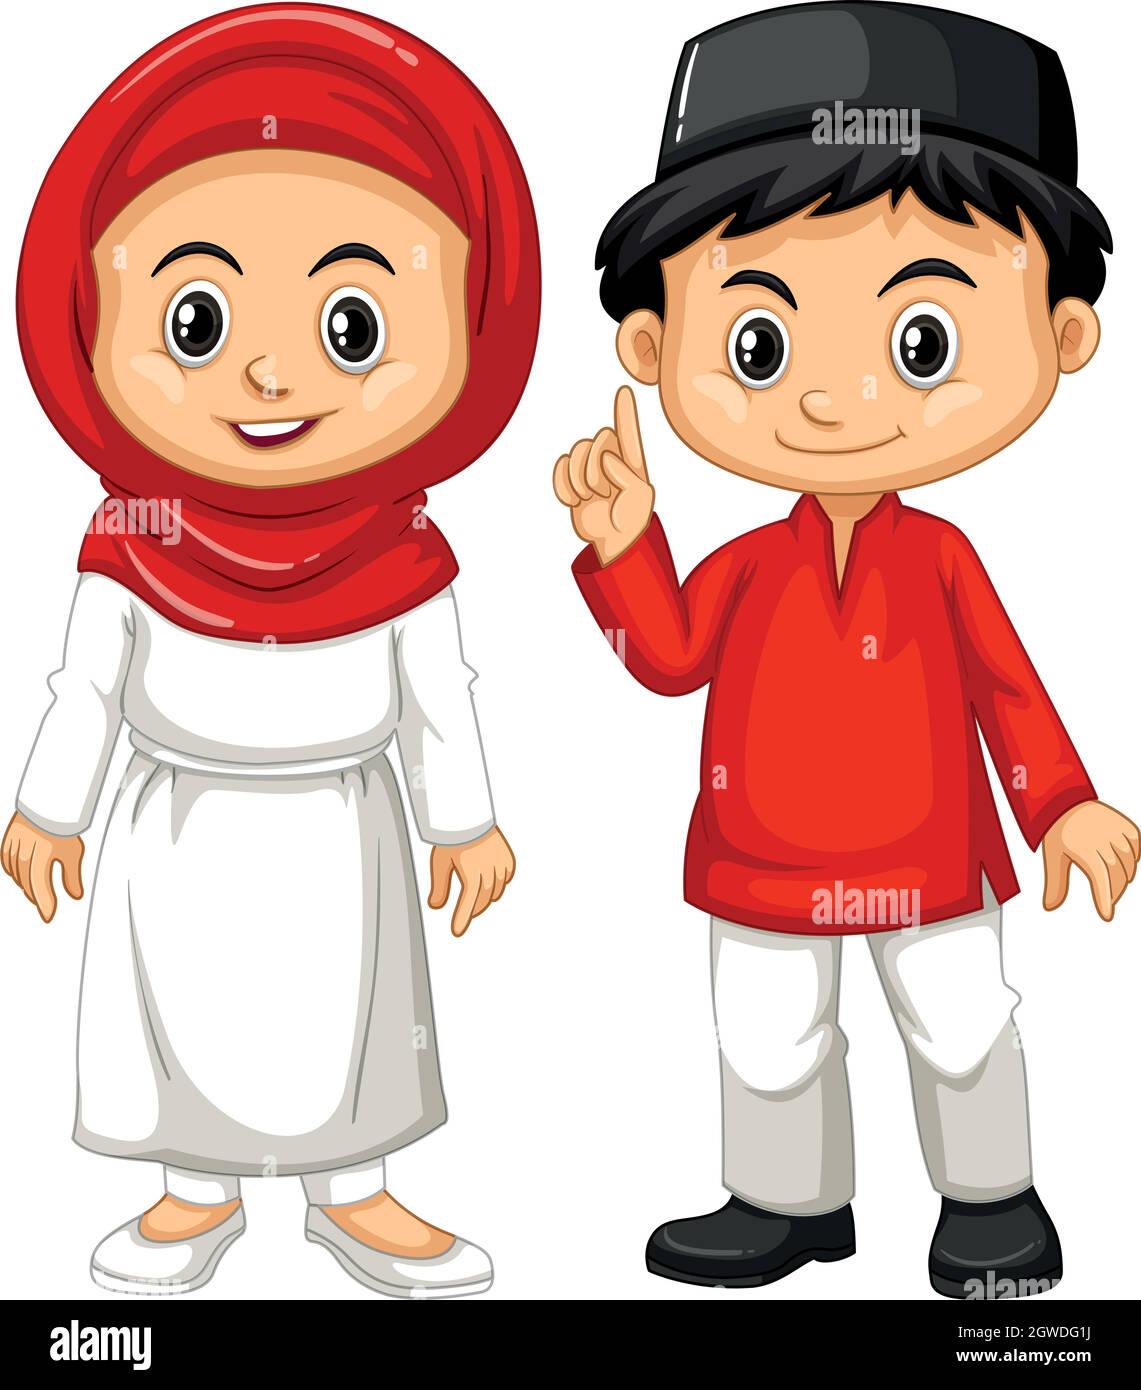 Indonesian boy and girl in traditional outfit Stock Vector